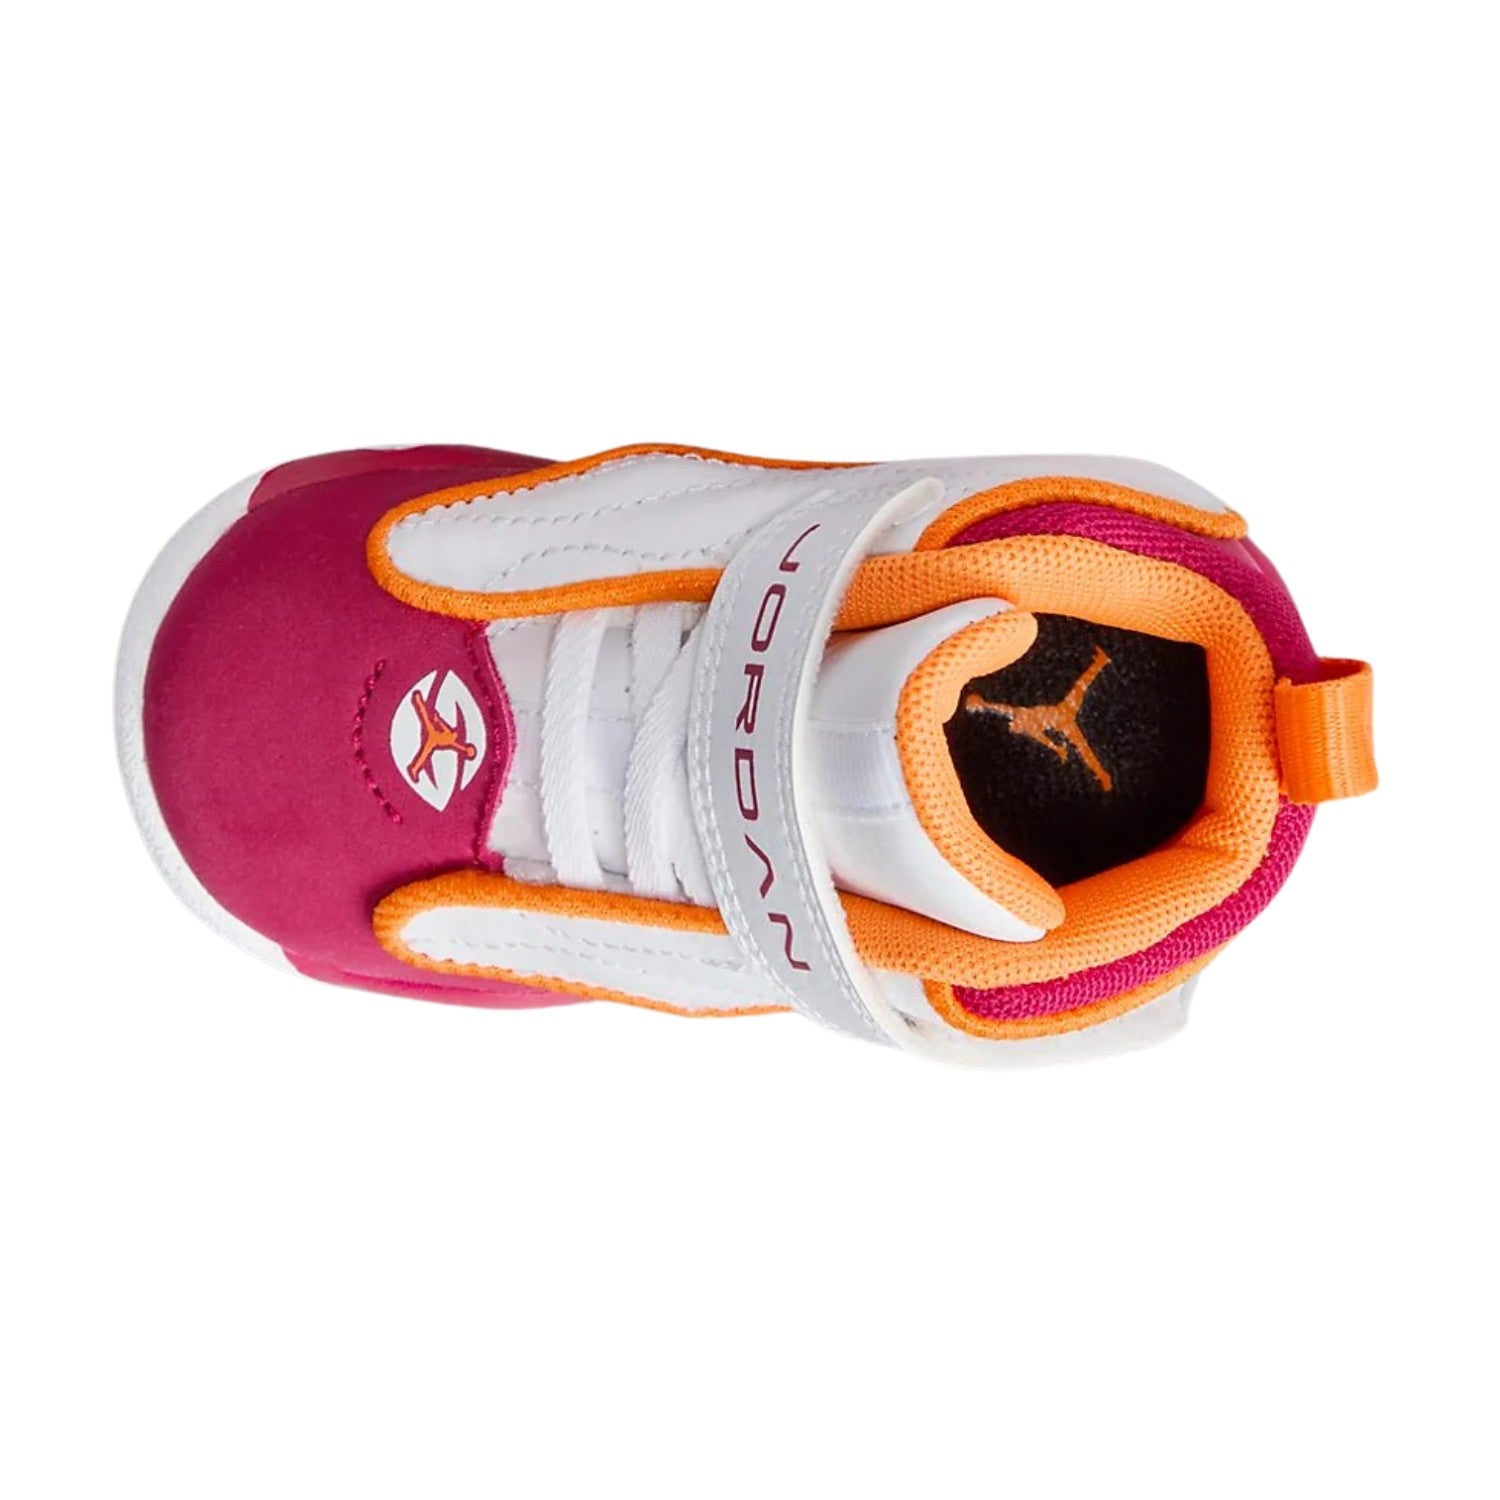 Jordan Pro Strong (Td) Toddlers Style : Dc7910